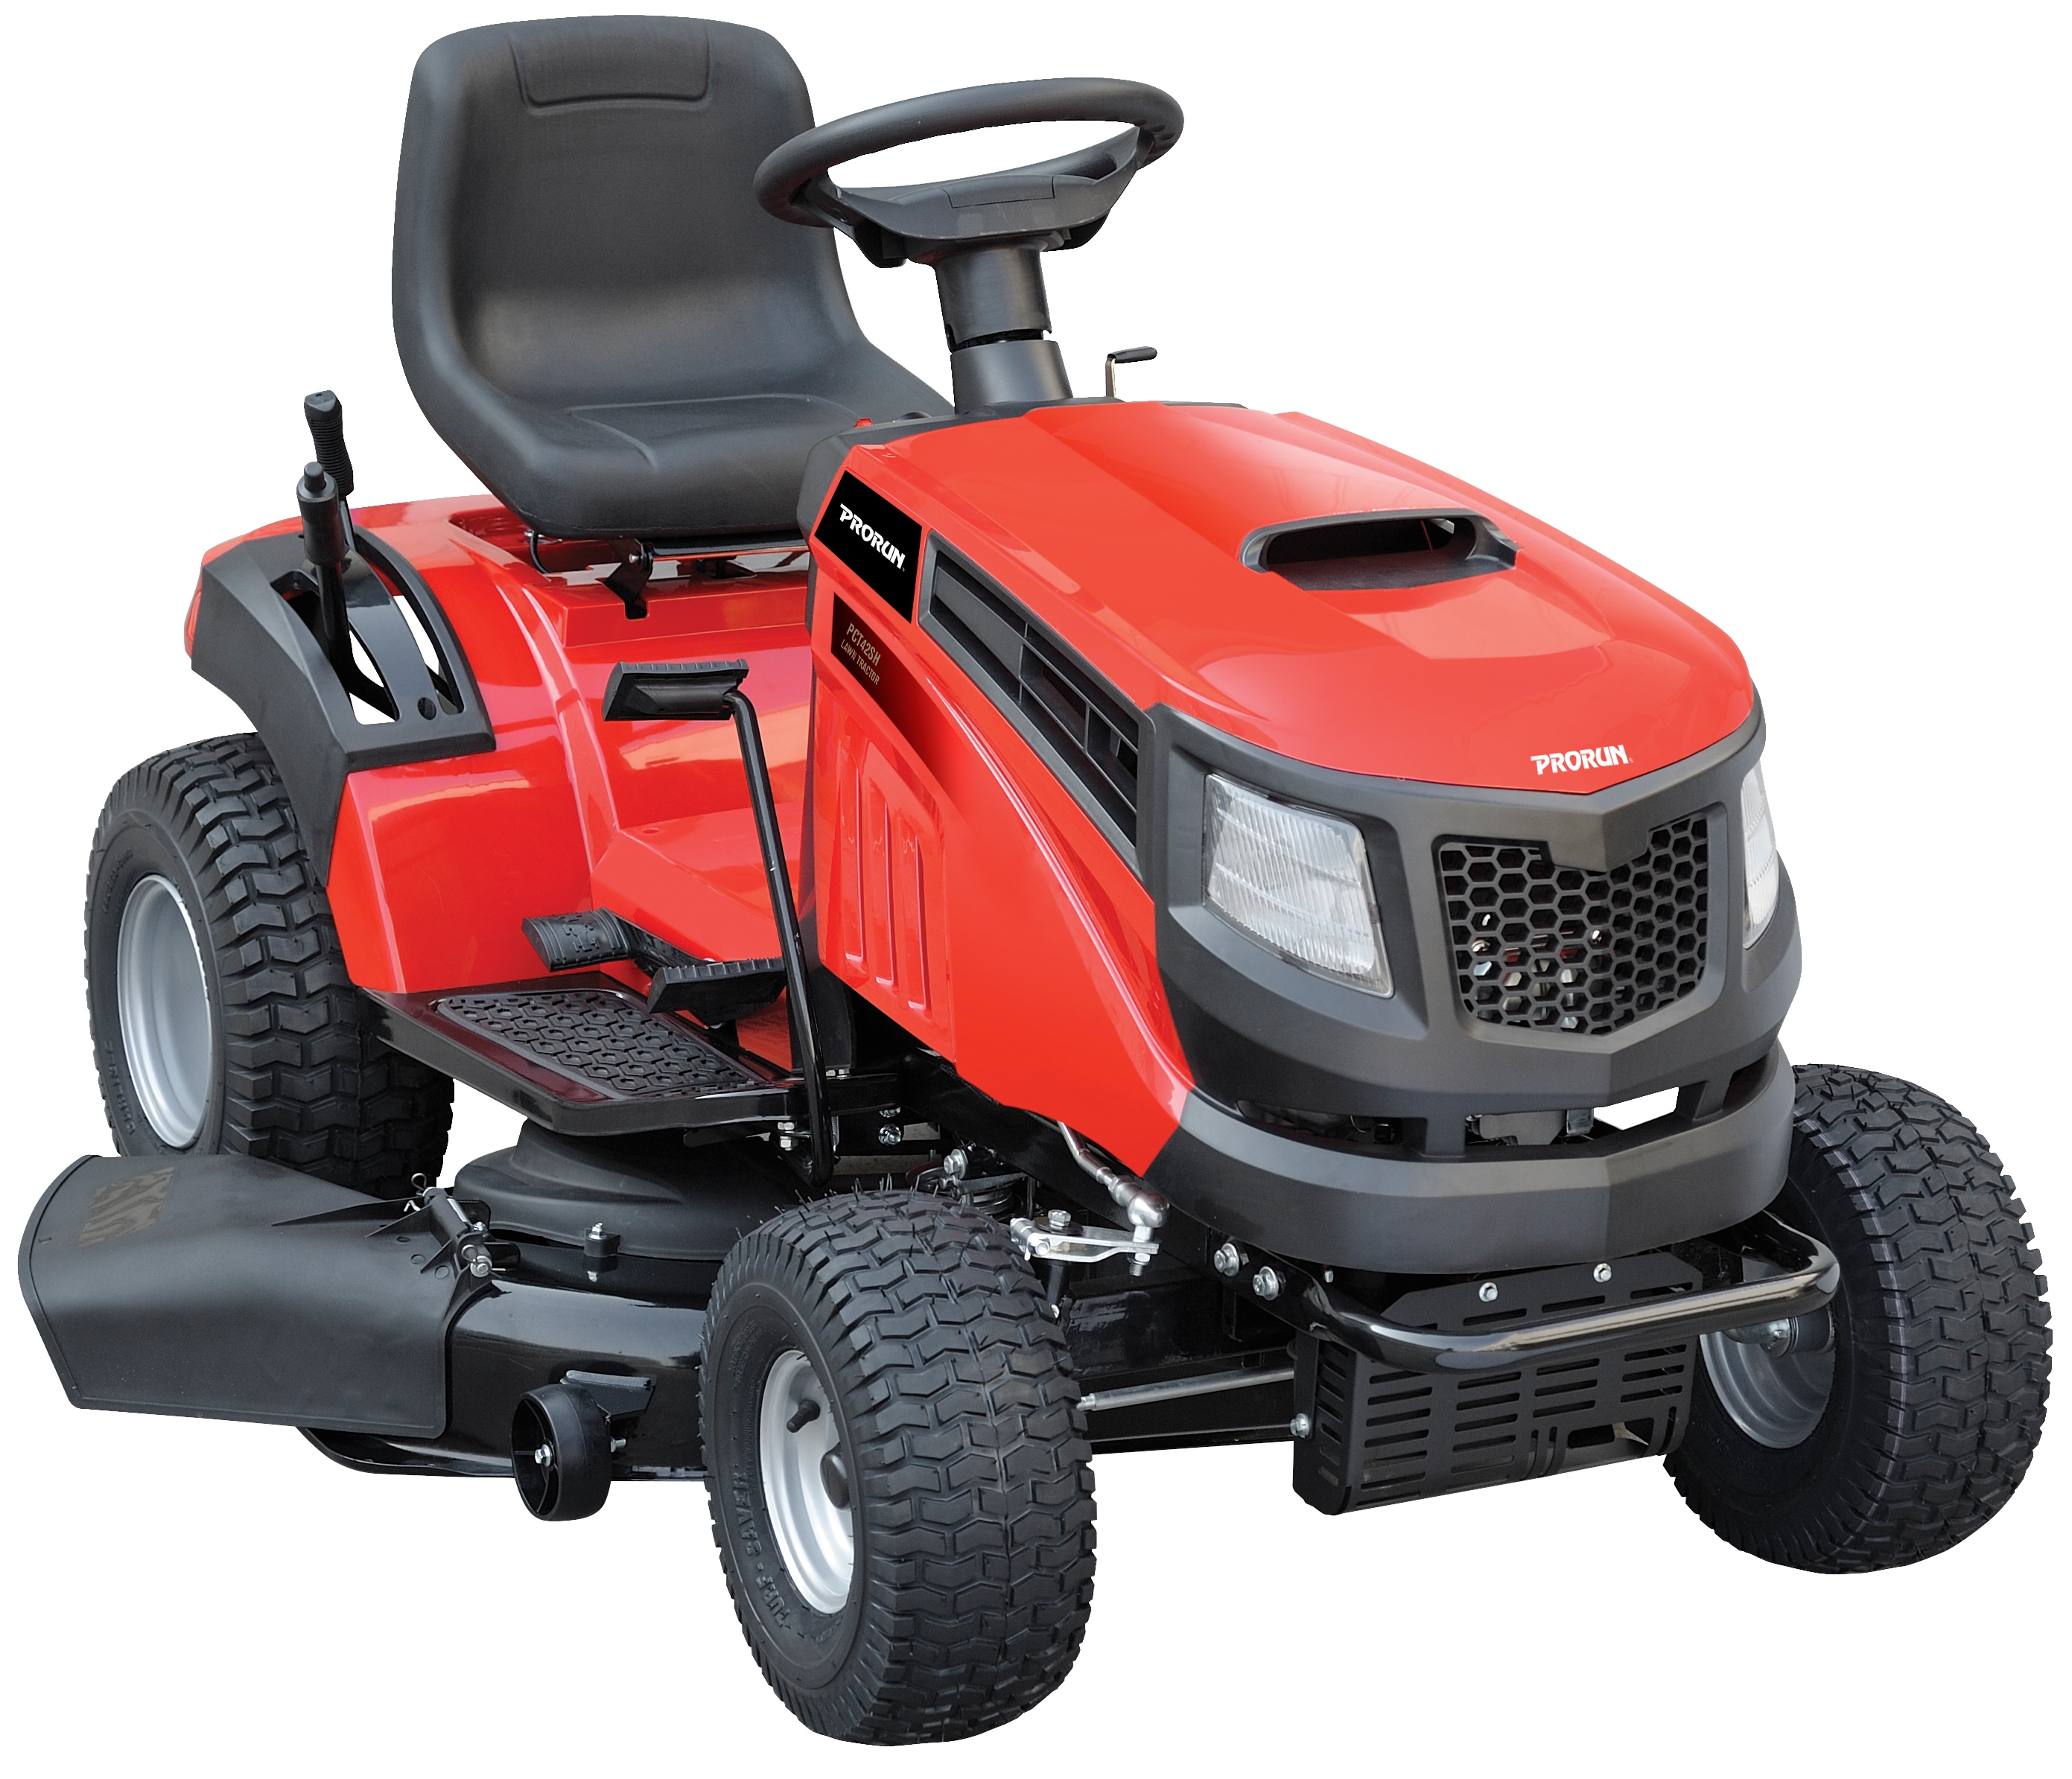 16 Horsepower Riding Lawn Mowers at